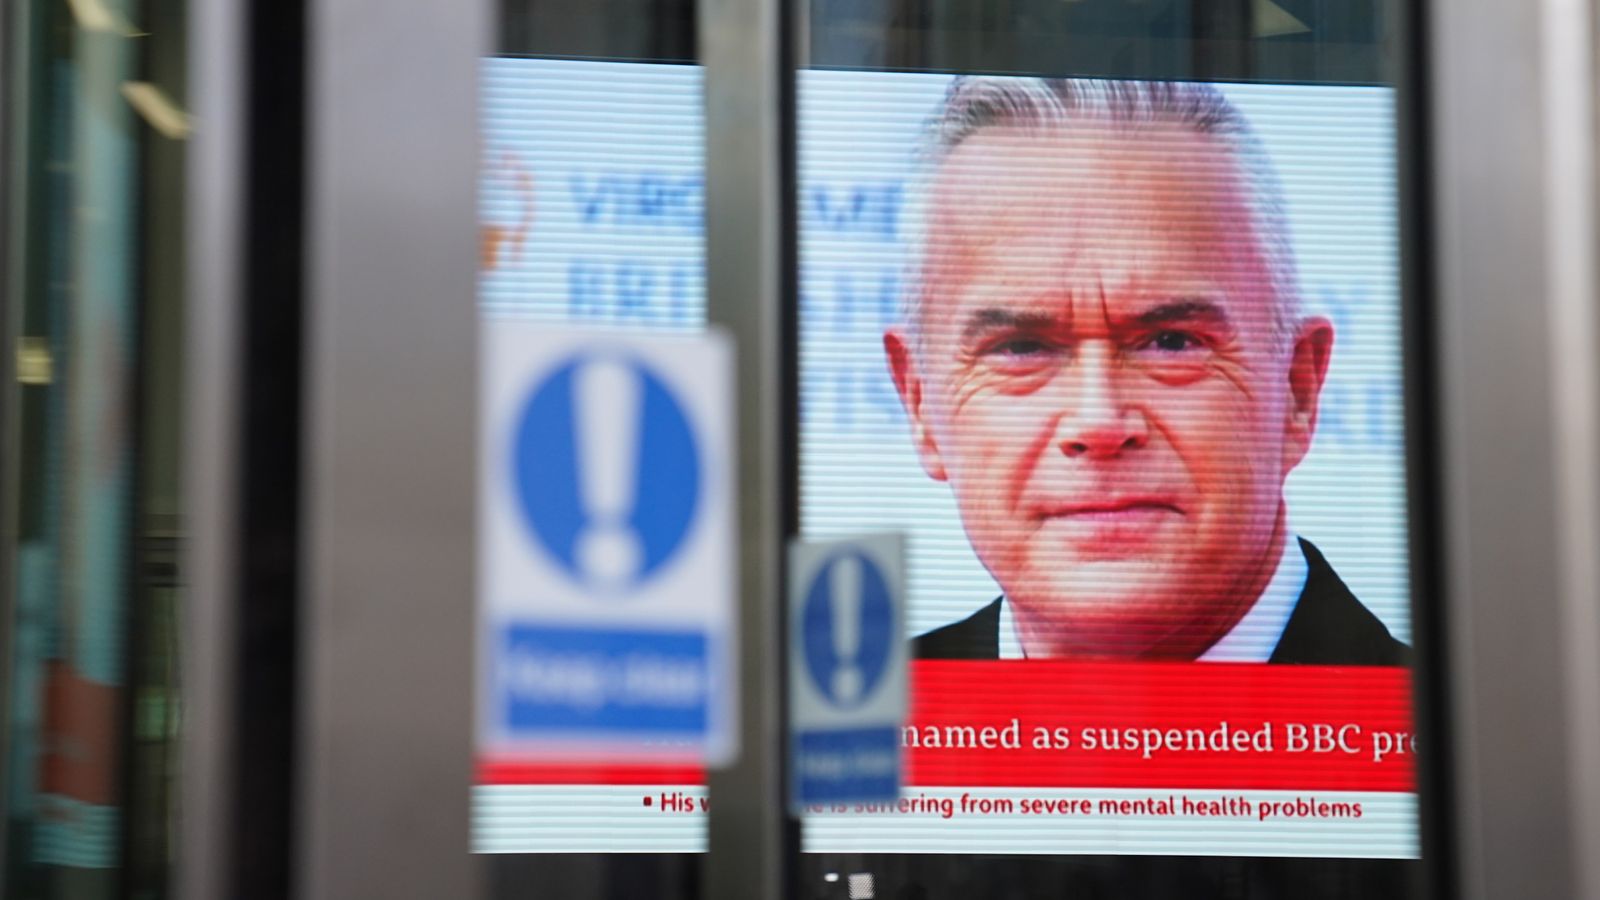 Huw Edwards accused of sending 'flirtatious' messages to BBC employees